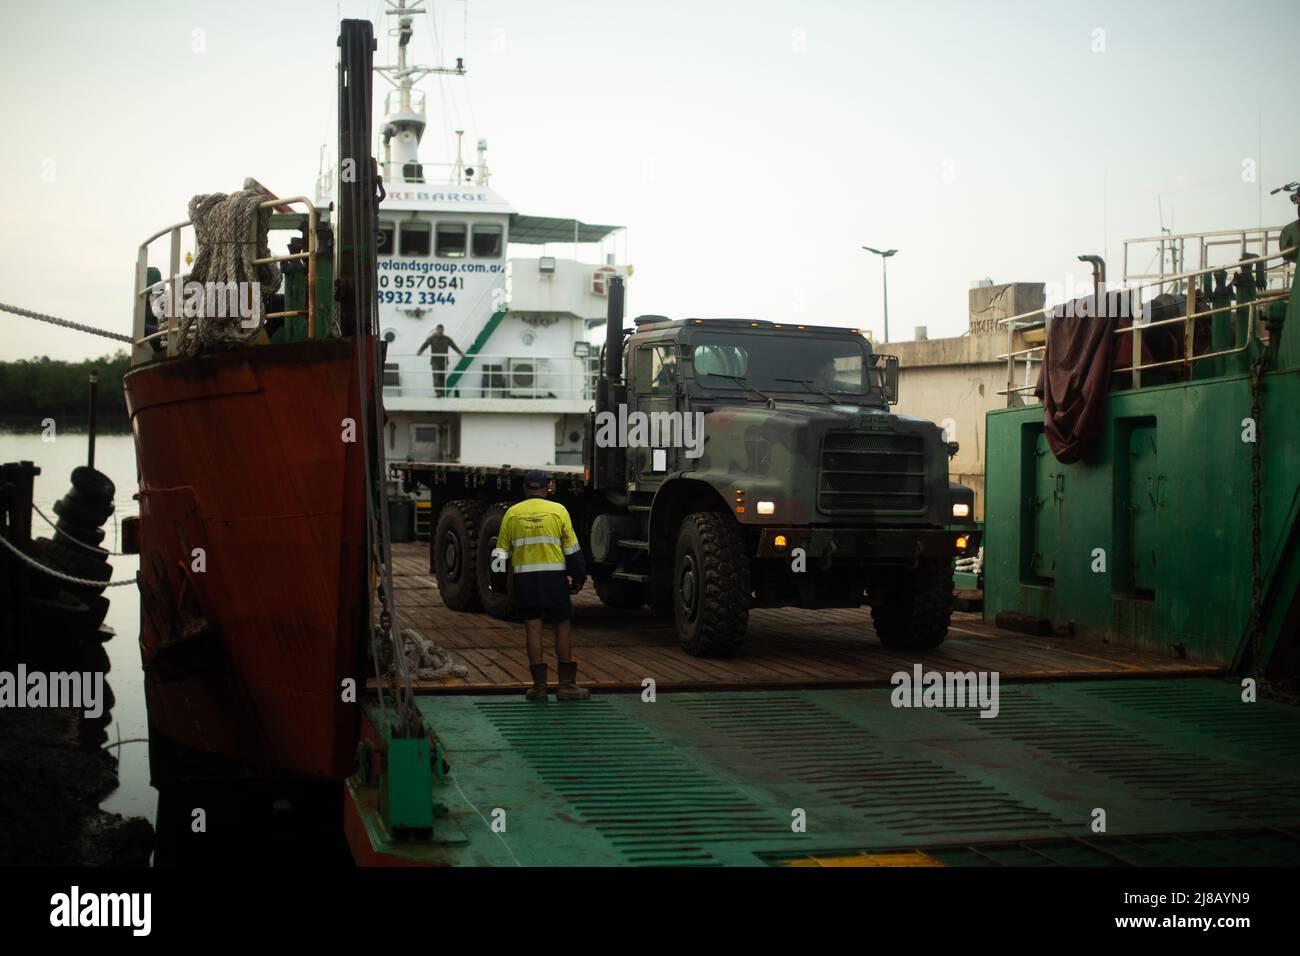 A U.S. Marine with the Logistics Command Element, Marine Rotational Force-Darwin (MRF-D) 22, loads a Medium Tactical Vehicle Replacement onto a barge during a combined logistics movement of equipment for exercise Crocodile Response 22 at Darwin, NT, Australia, May 12, 2022. MRF-D 22 and Australian Army equipment was loaded onto civilian barges for transportation, demonstrating the flexibility to conduct humanitarian assistance and disaster relief within different operating environments. (U.S. Marine Corps Photo by Cpl. Cedar Barnes) Stock Photo